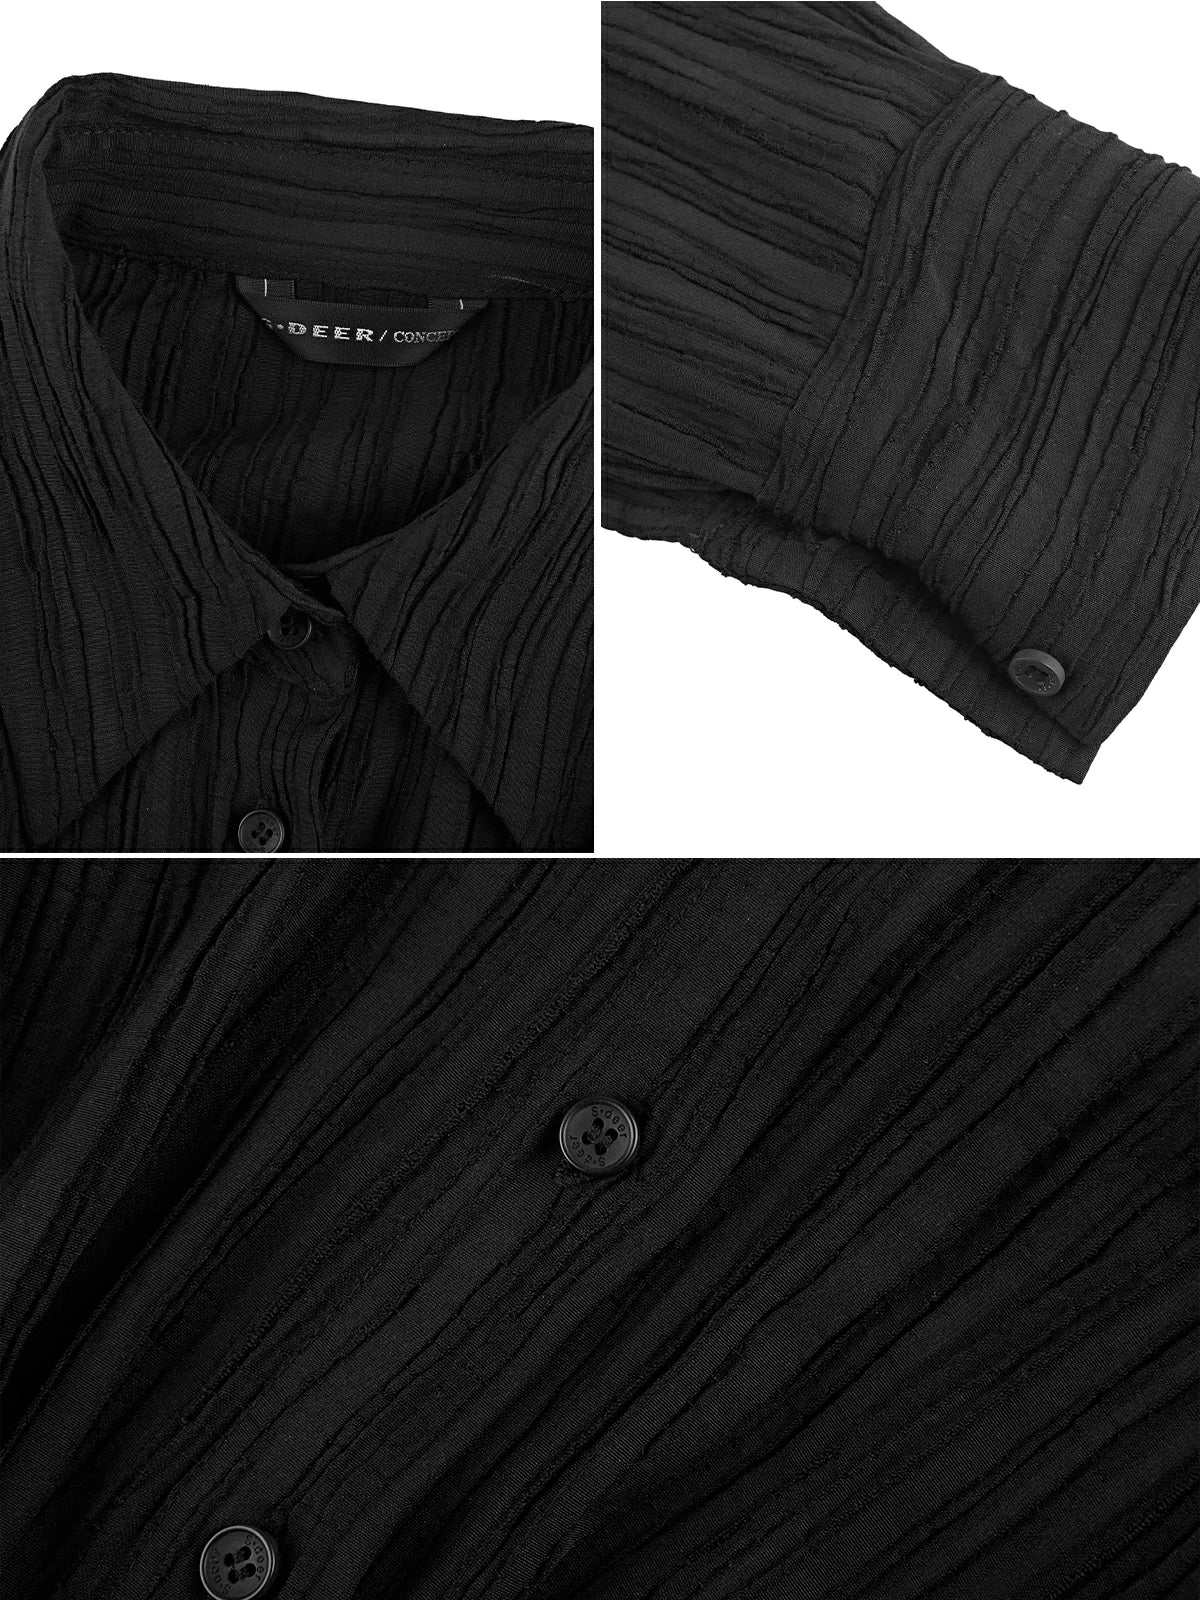 Striped pattern design adding layers and detailing to the black shirt